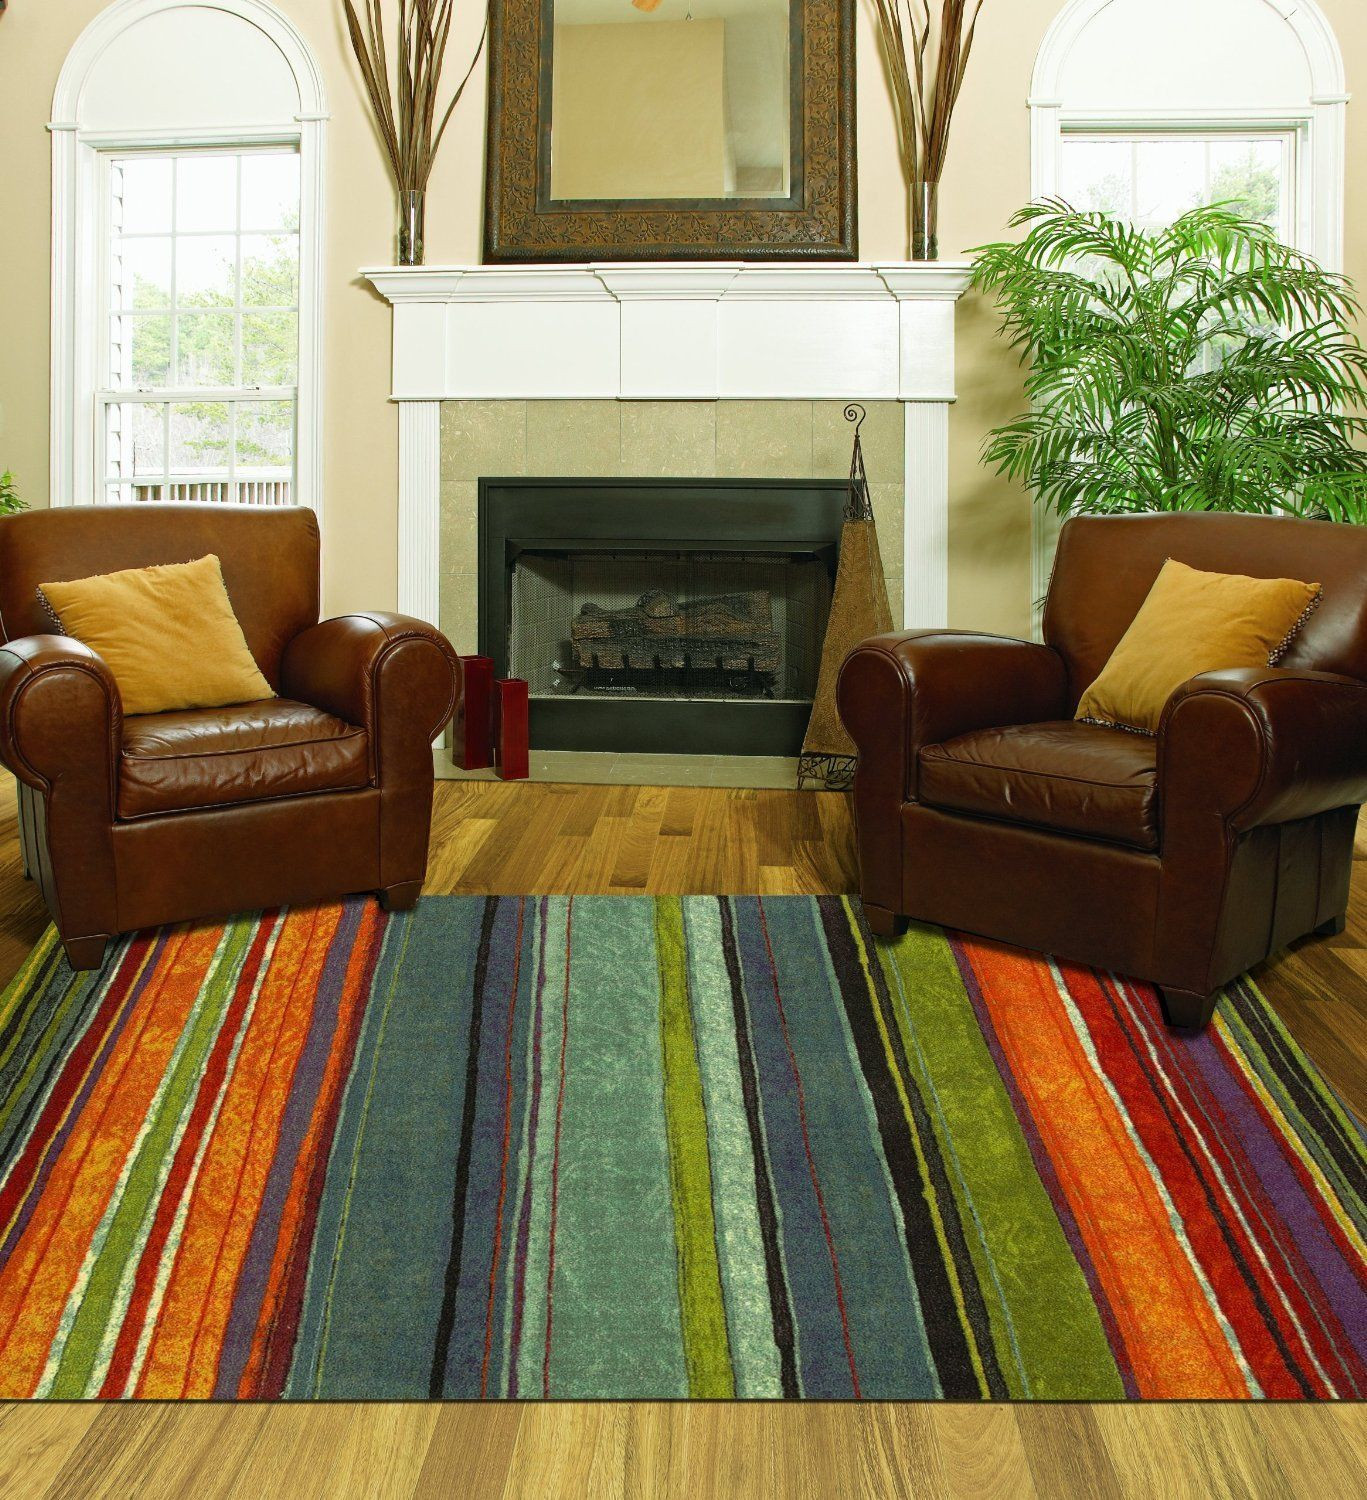 Oversized Rugs For Living Room
 Area Rug Colorful 8x10 Living Room Size Carpet Home